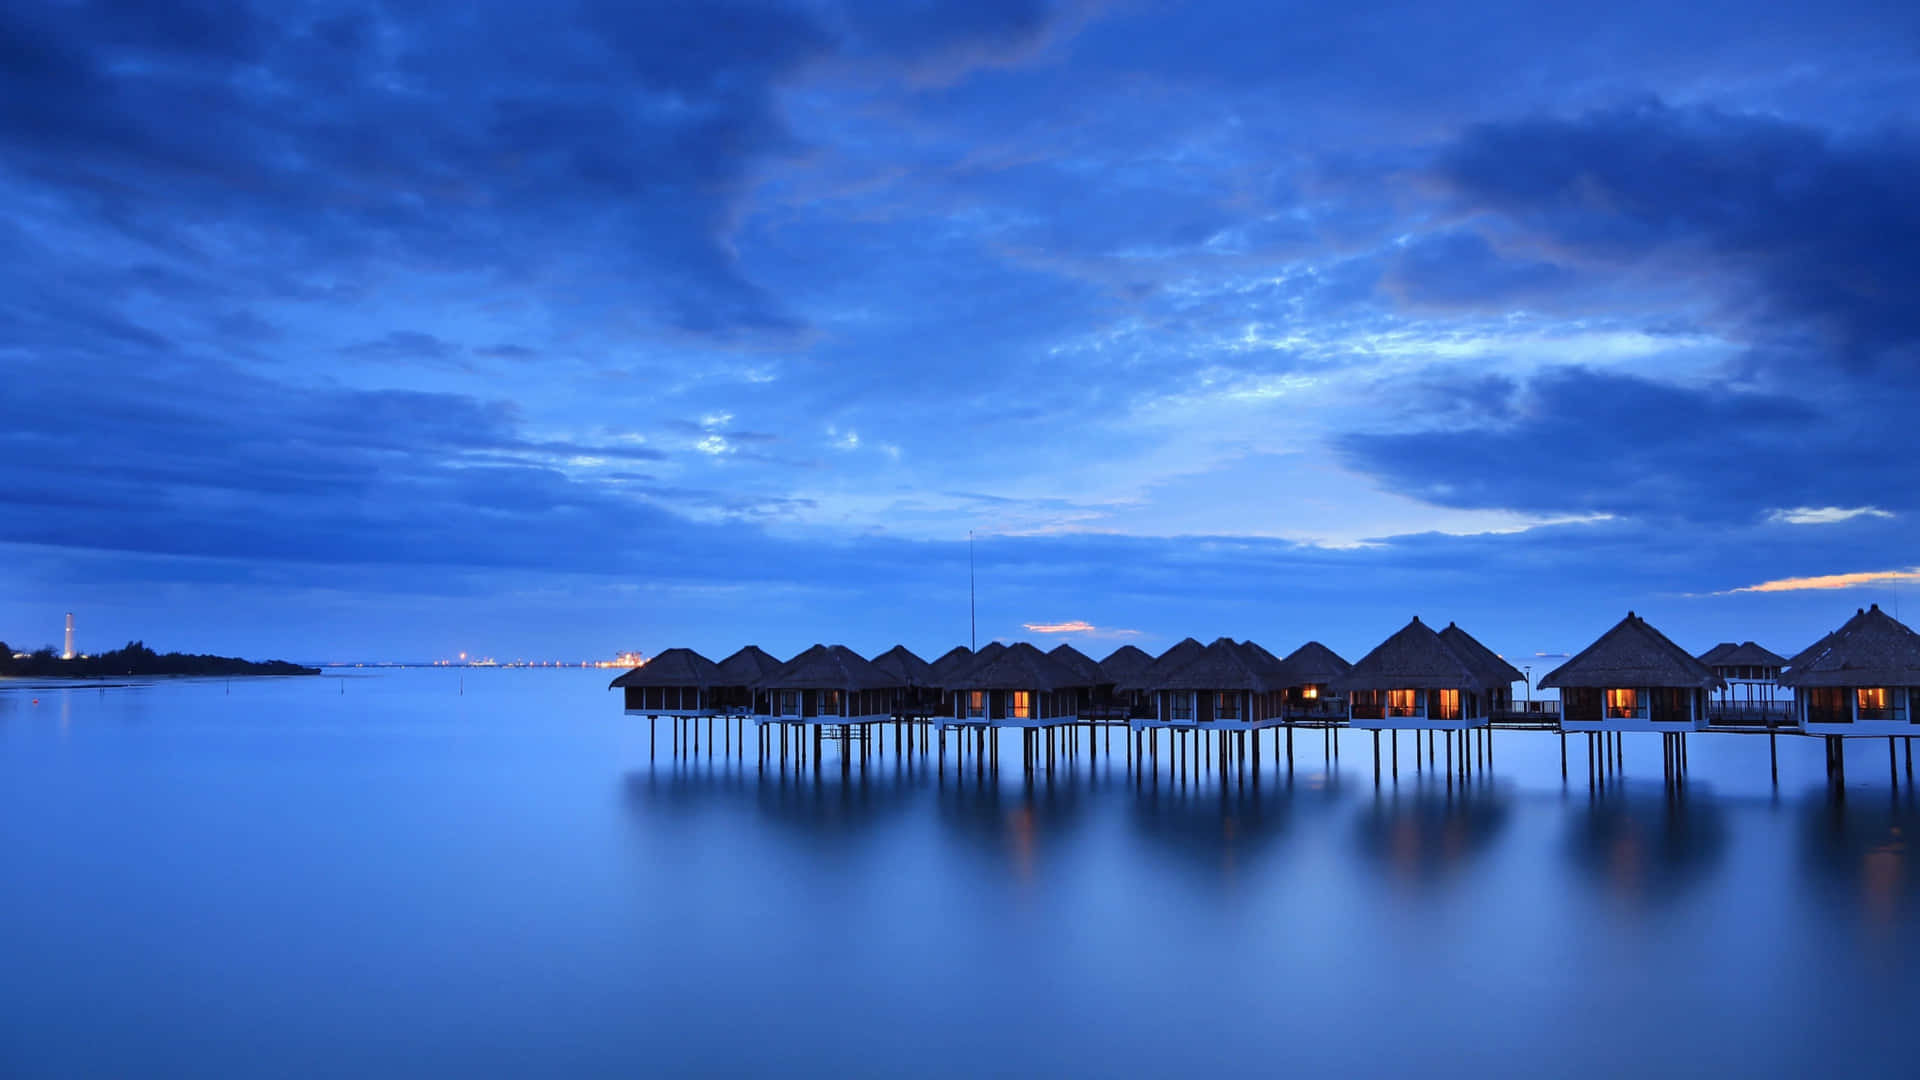 A Group Of Huts On A Dock In The Water